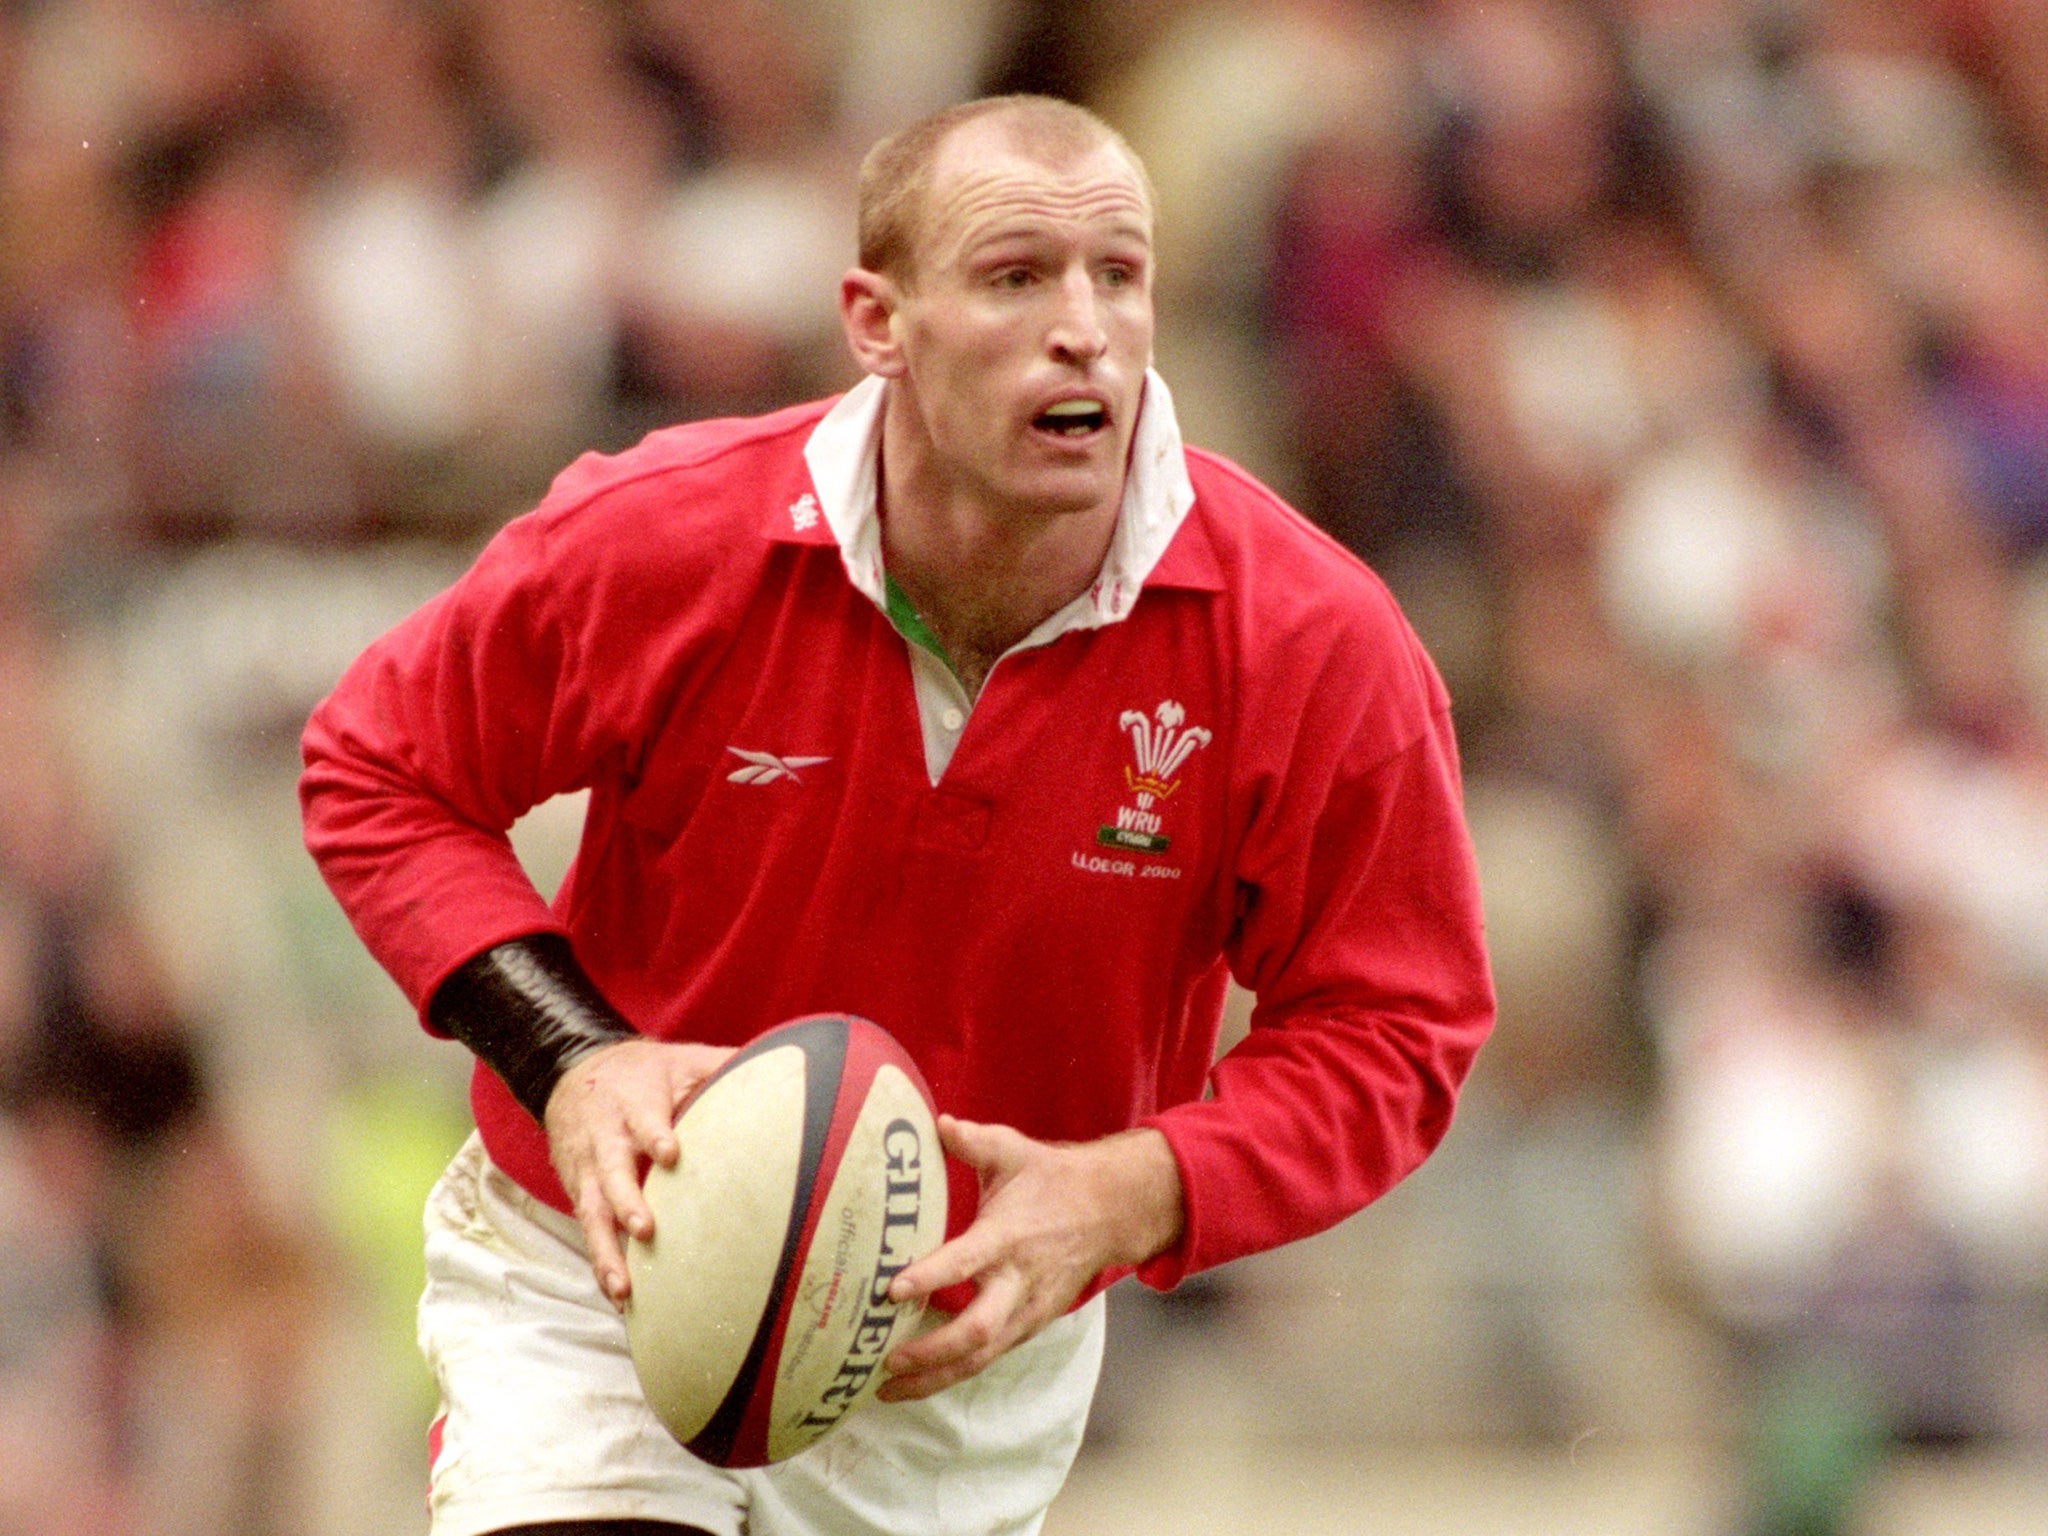 Gareth Thomas playing rugby union for Wales